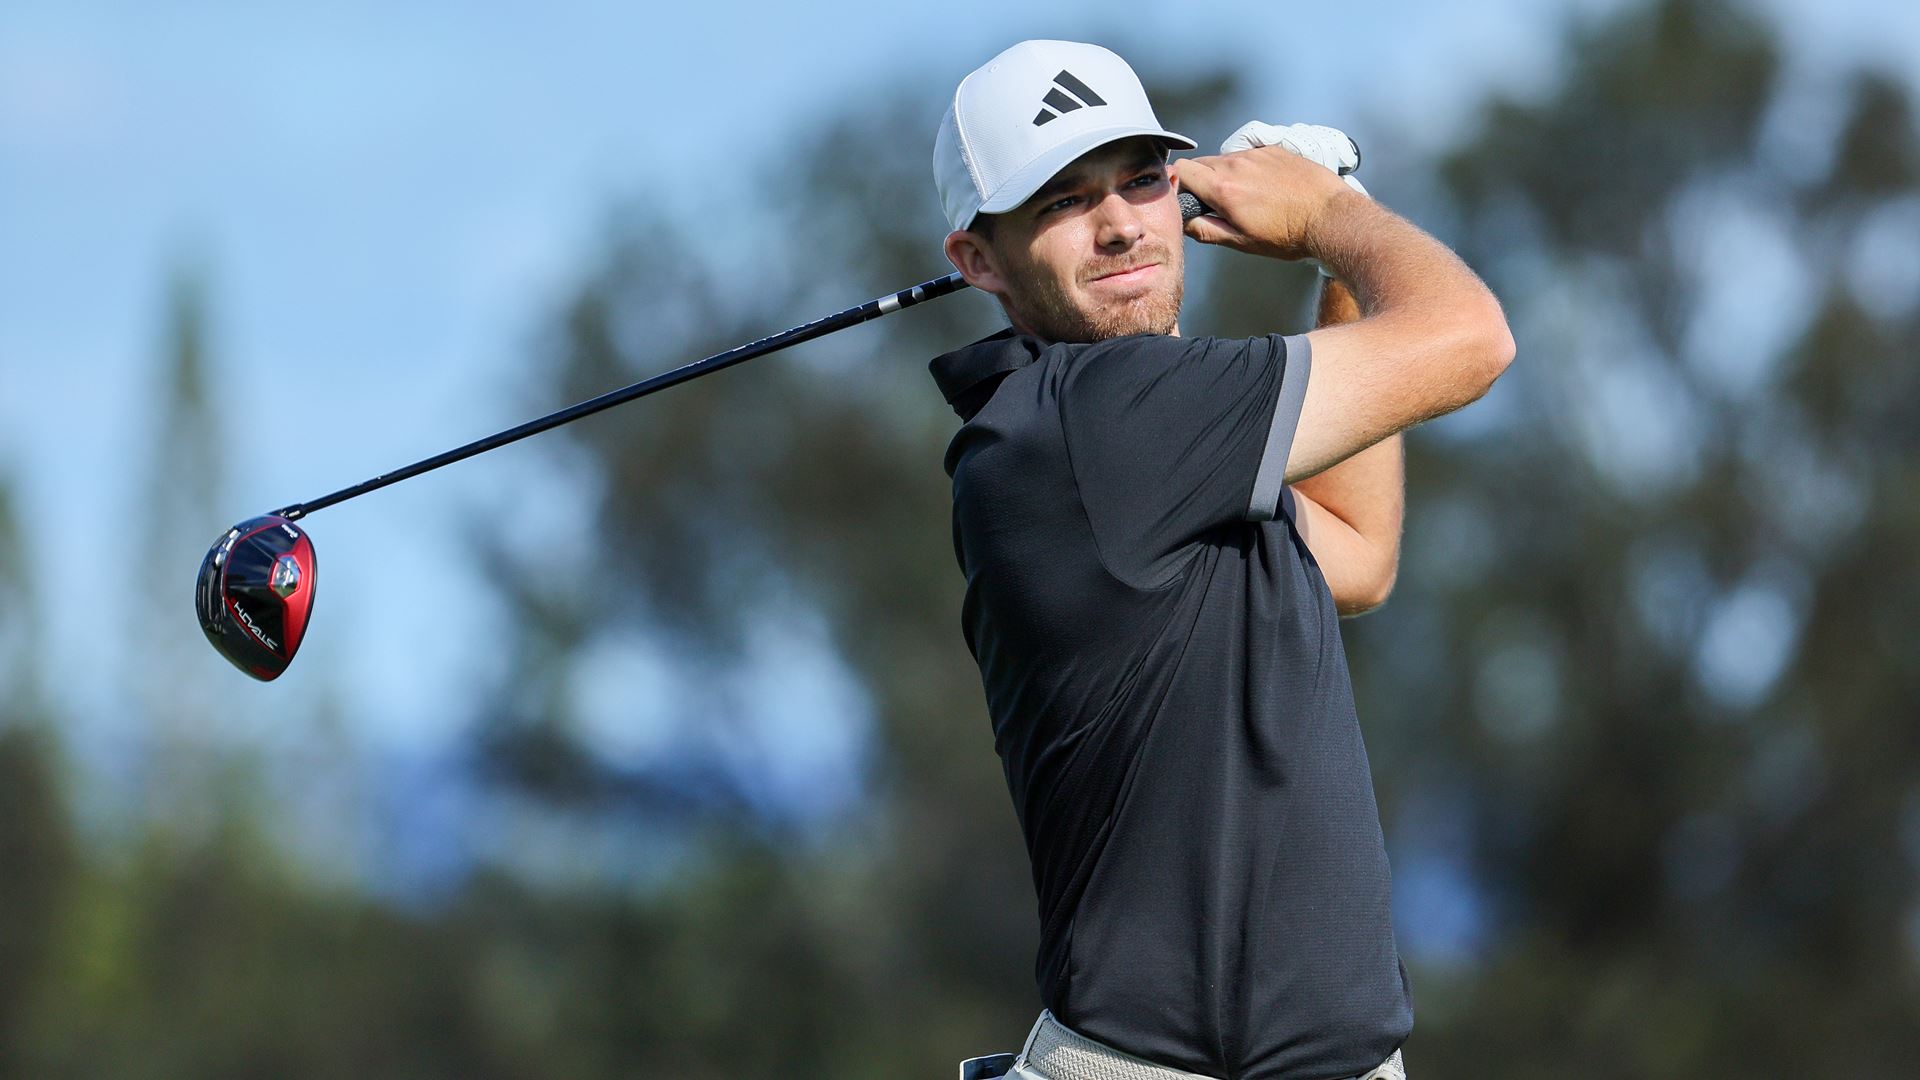 Aaron Wise Joins Team TaylorMade; Set to Play Stealth 2 Plus Driver and Stealth 2 Plus Fairway at the WM Phoenix Open